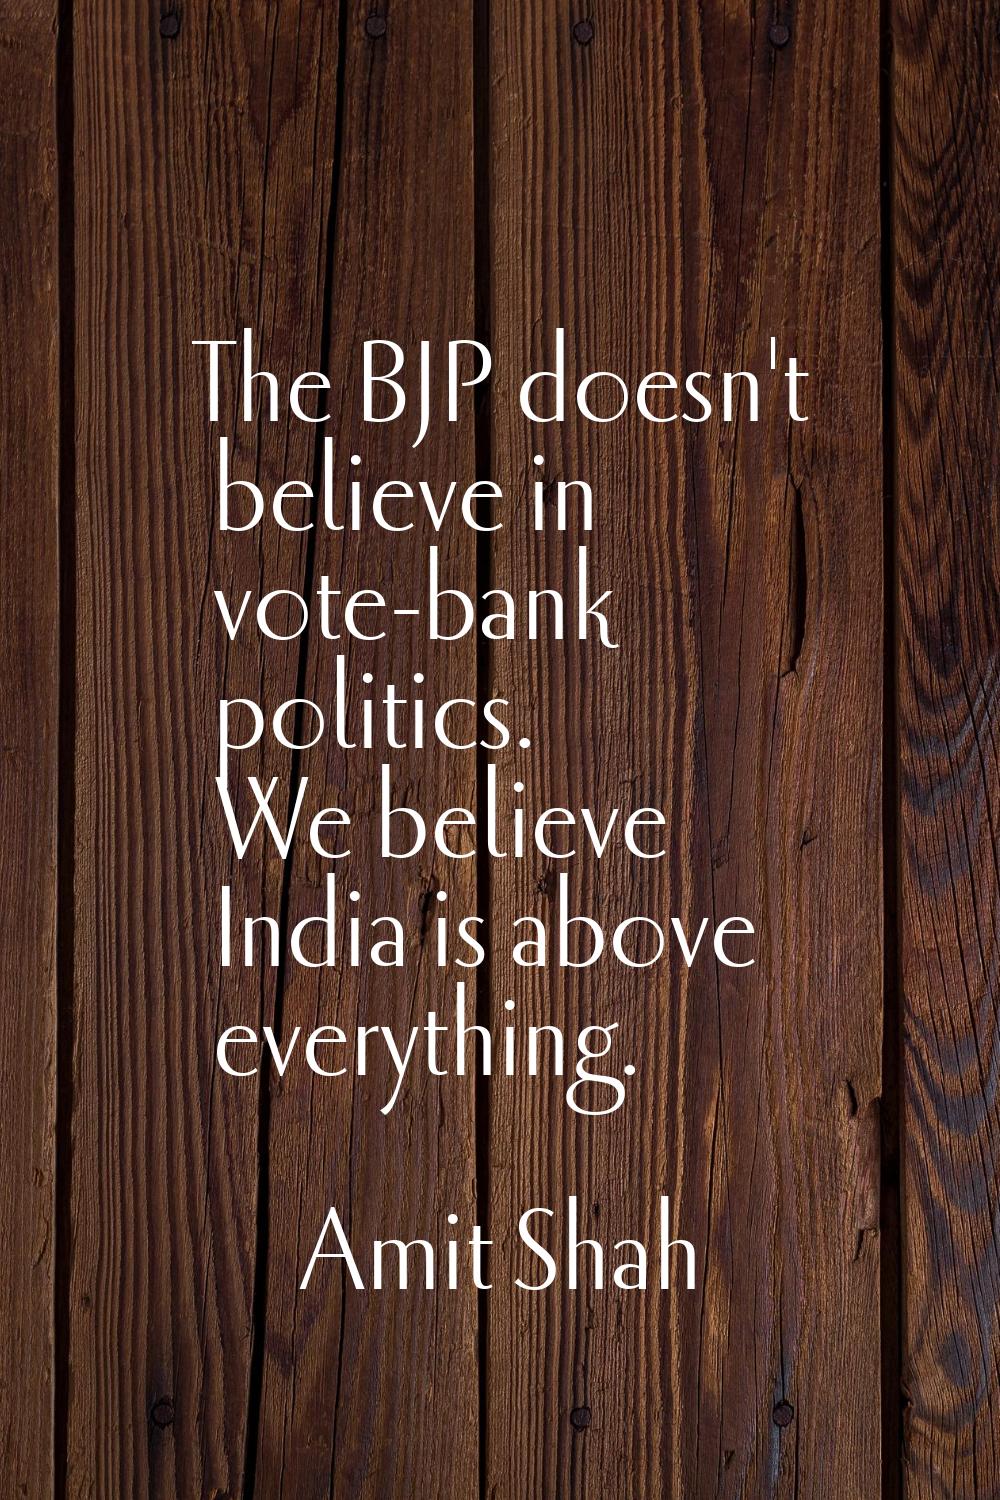 The BJP doesn't believe in vote-bank politics. We believe India is above everything.